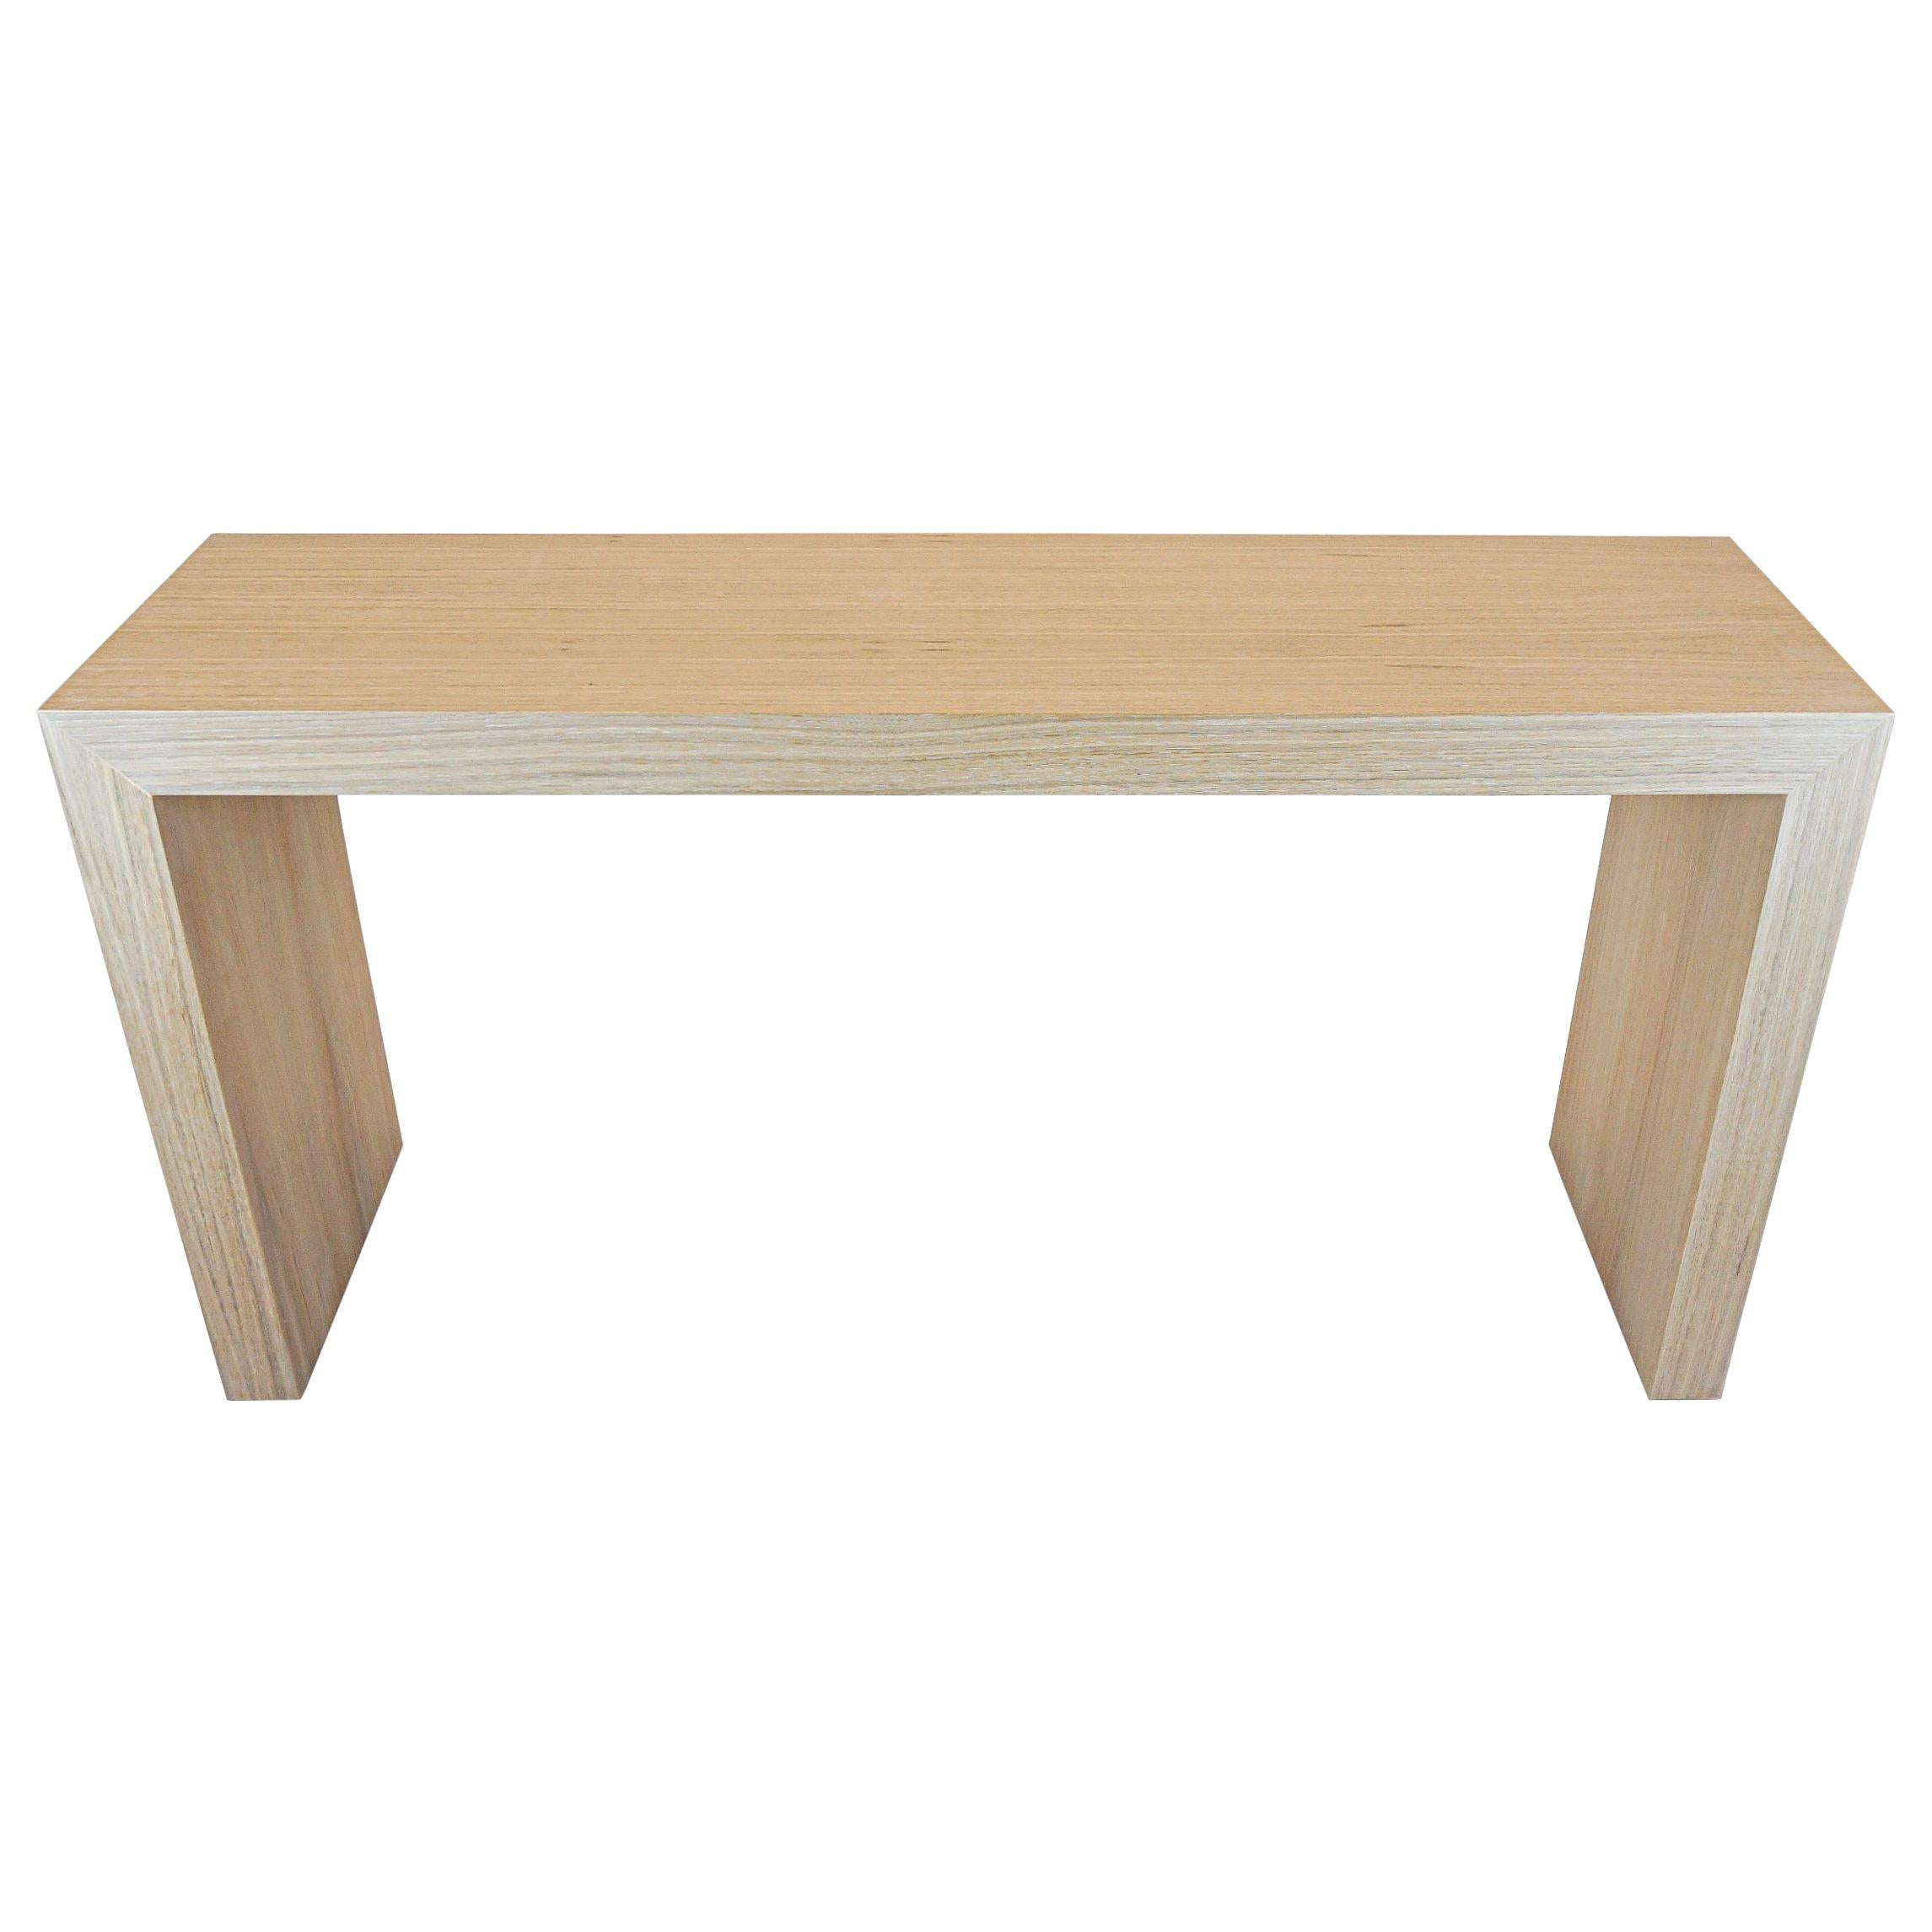 White Oak Veneer Waterfall Console with Clear Finish